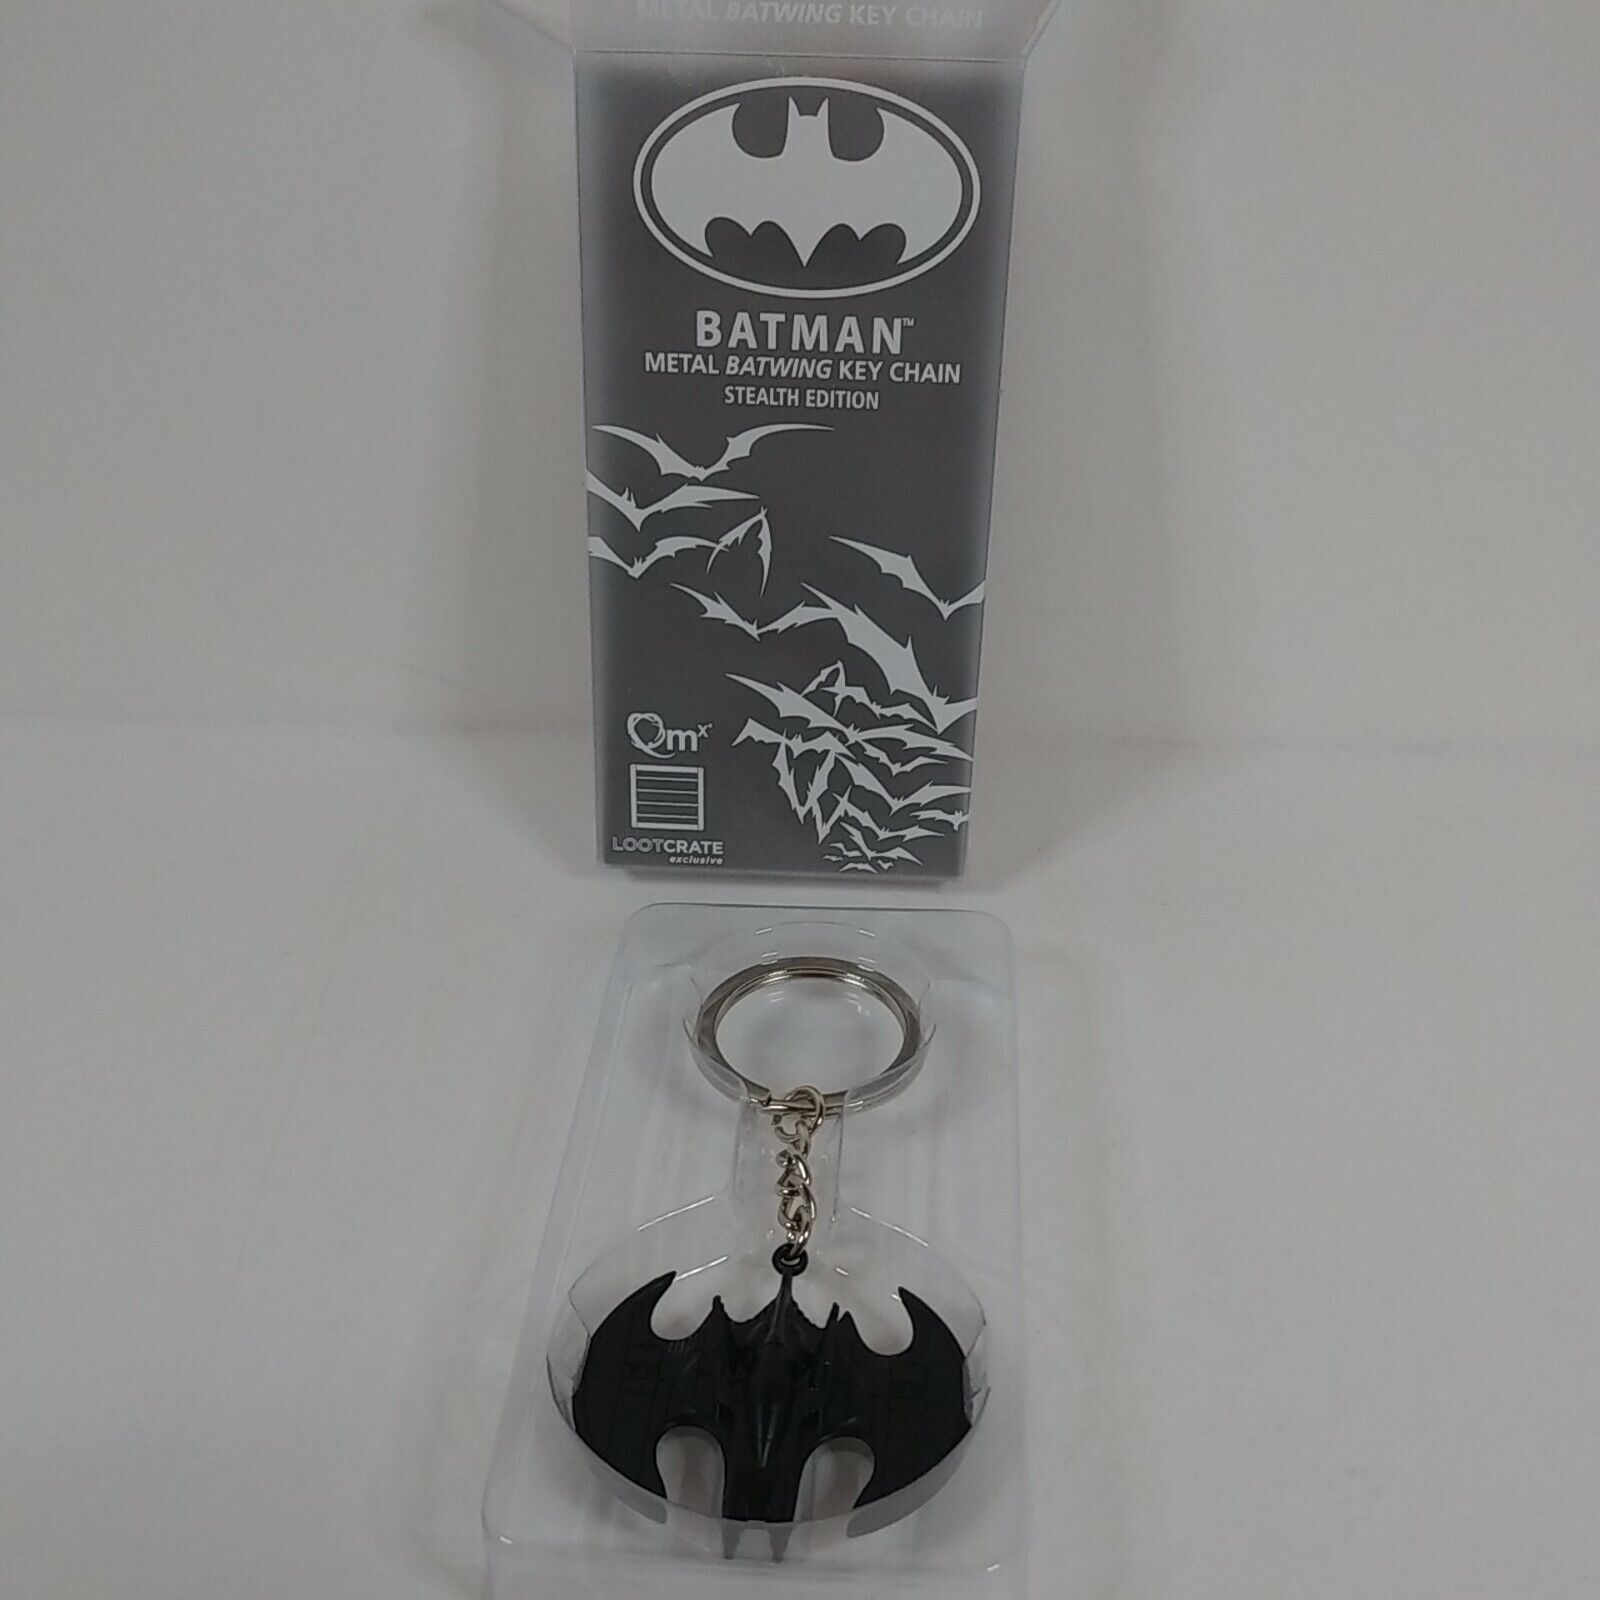 New Batman Metal Works Batwing Key Chain Stealth Edition Loot Crate Exclusive